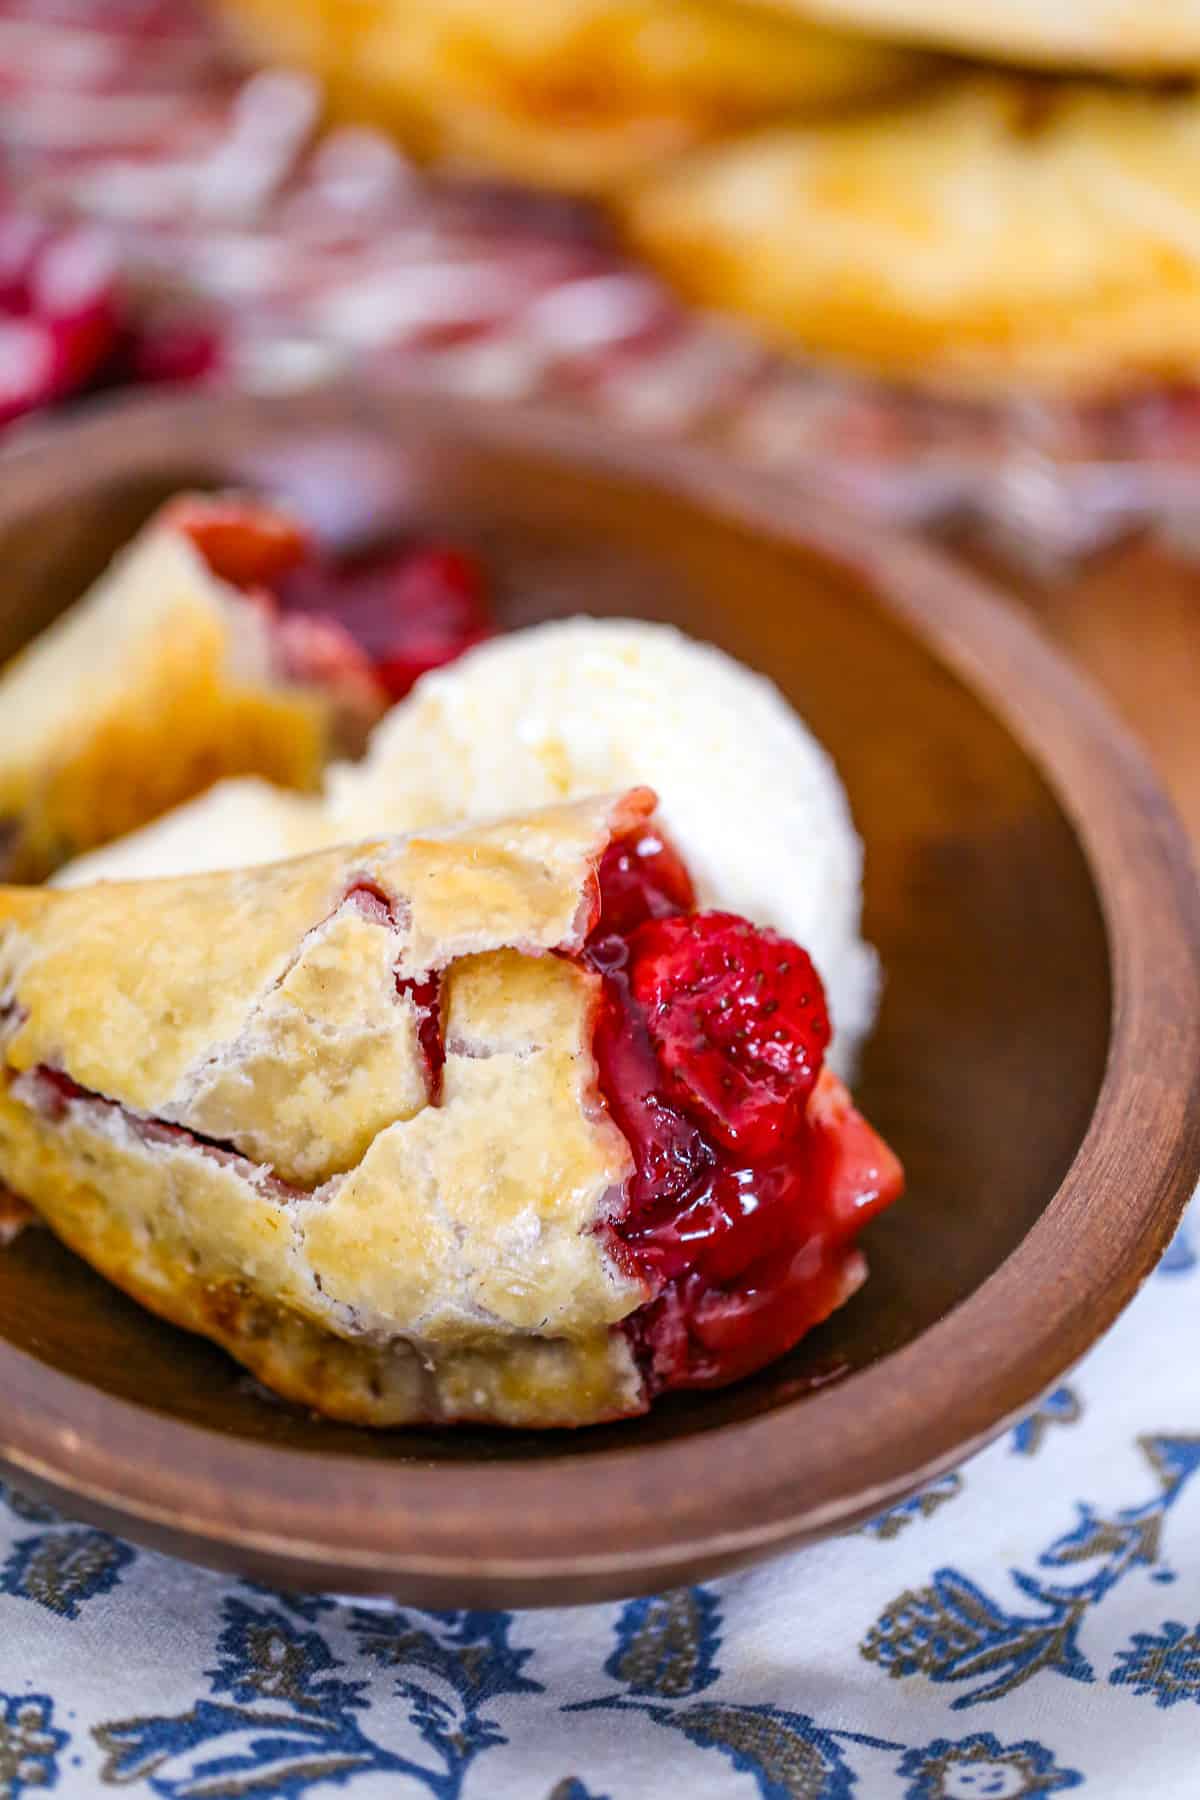 easy hand held pies recipe with shortcuts apple, blueberry, cherry, peach, blueberry, raspberry fillings using pie crust and topped with glaze